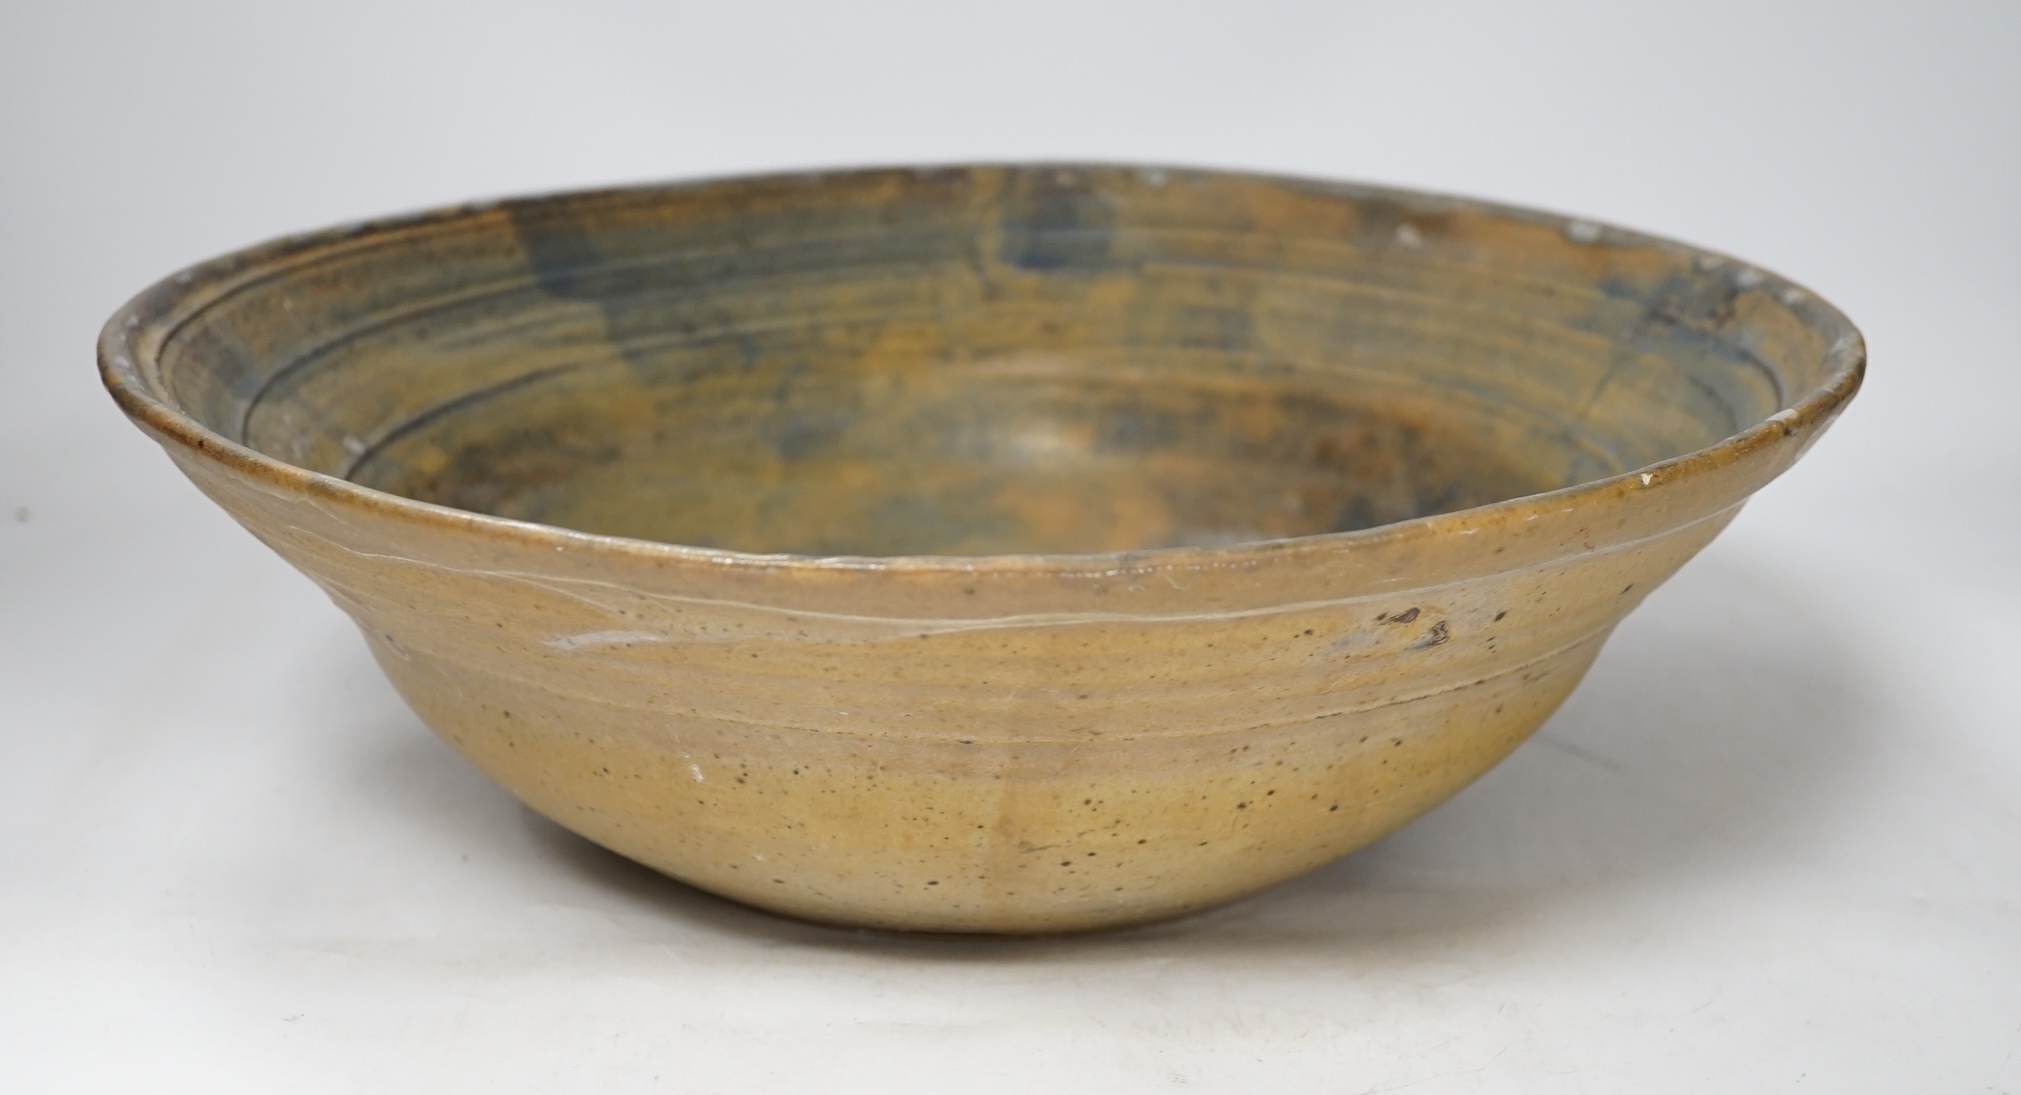 A large studio stoneware centre bowl with ‘B’ makers mark, 38cm in diameter. Condition - good